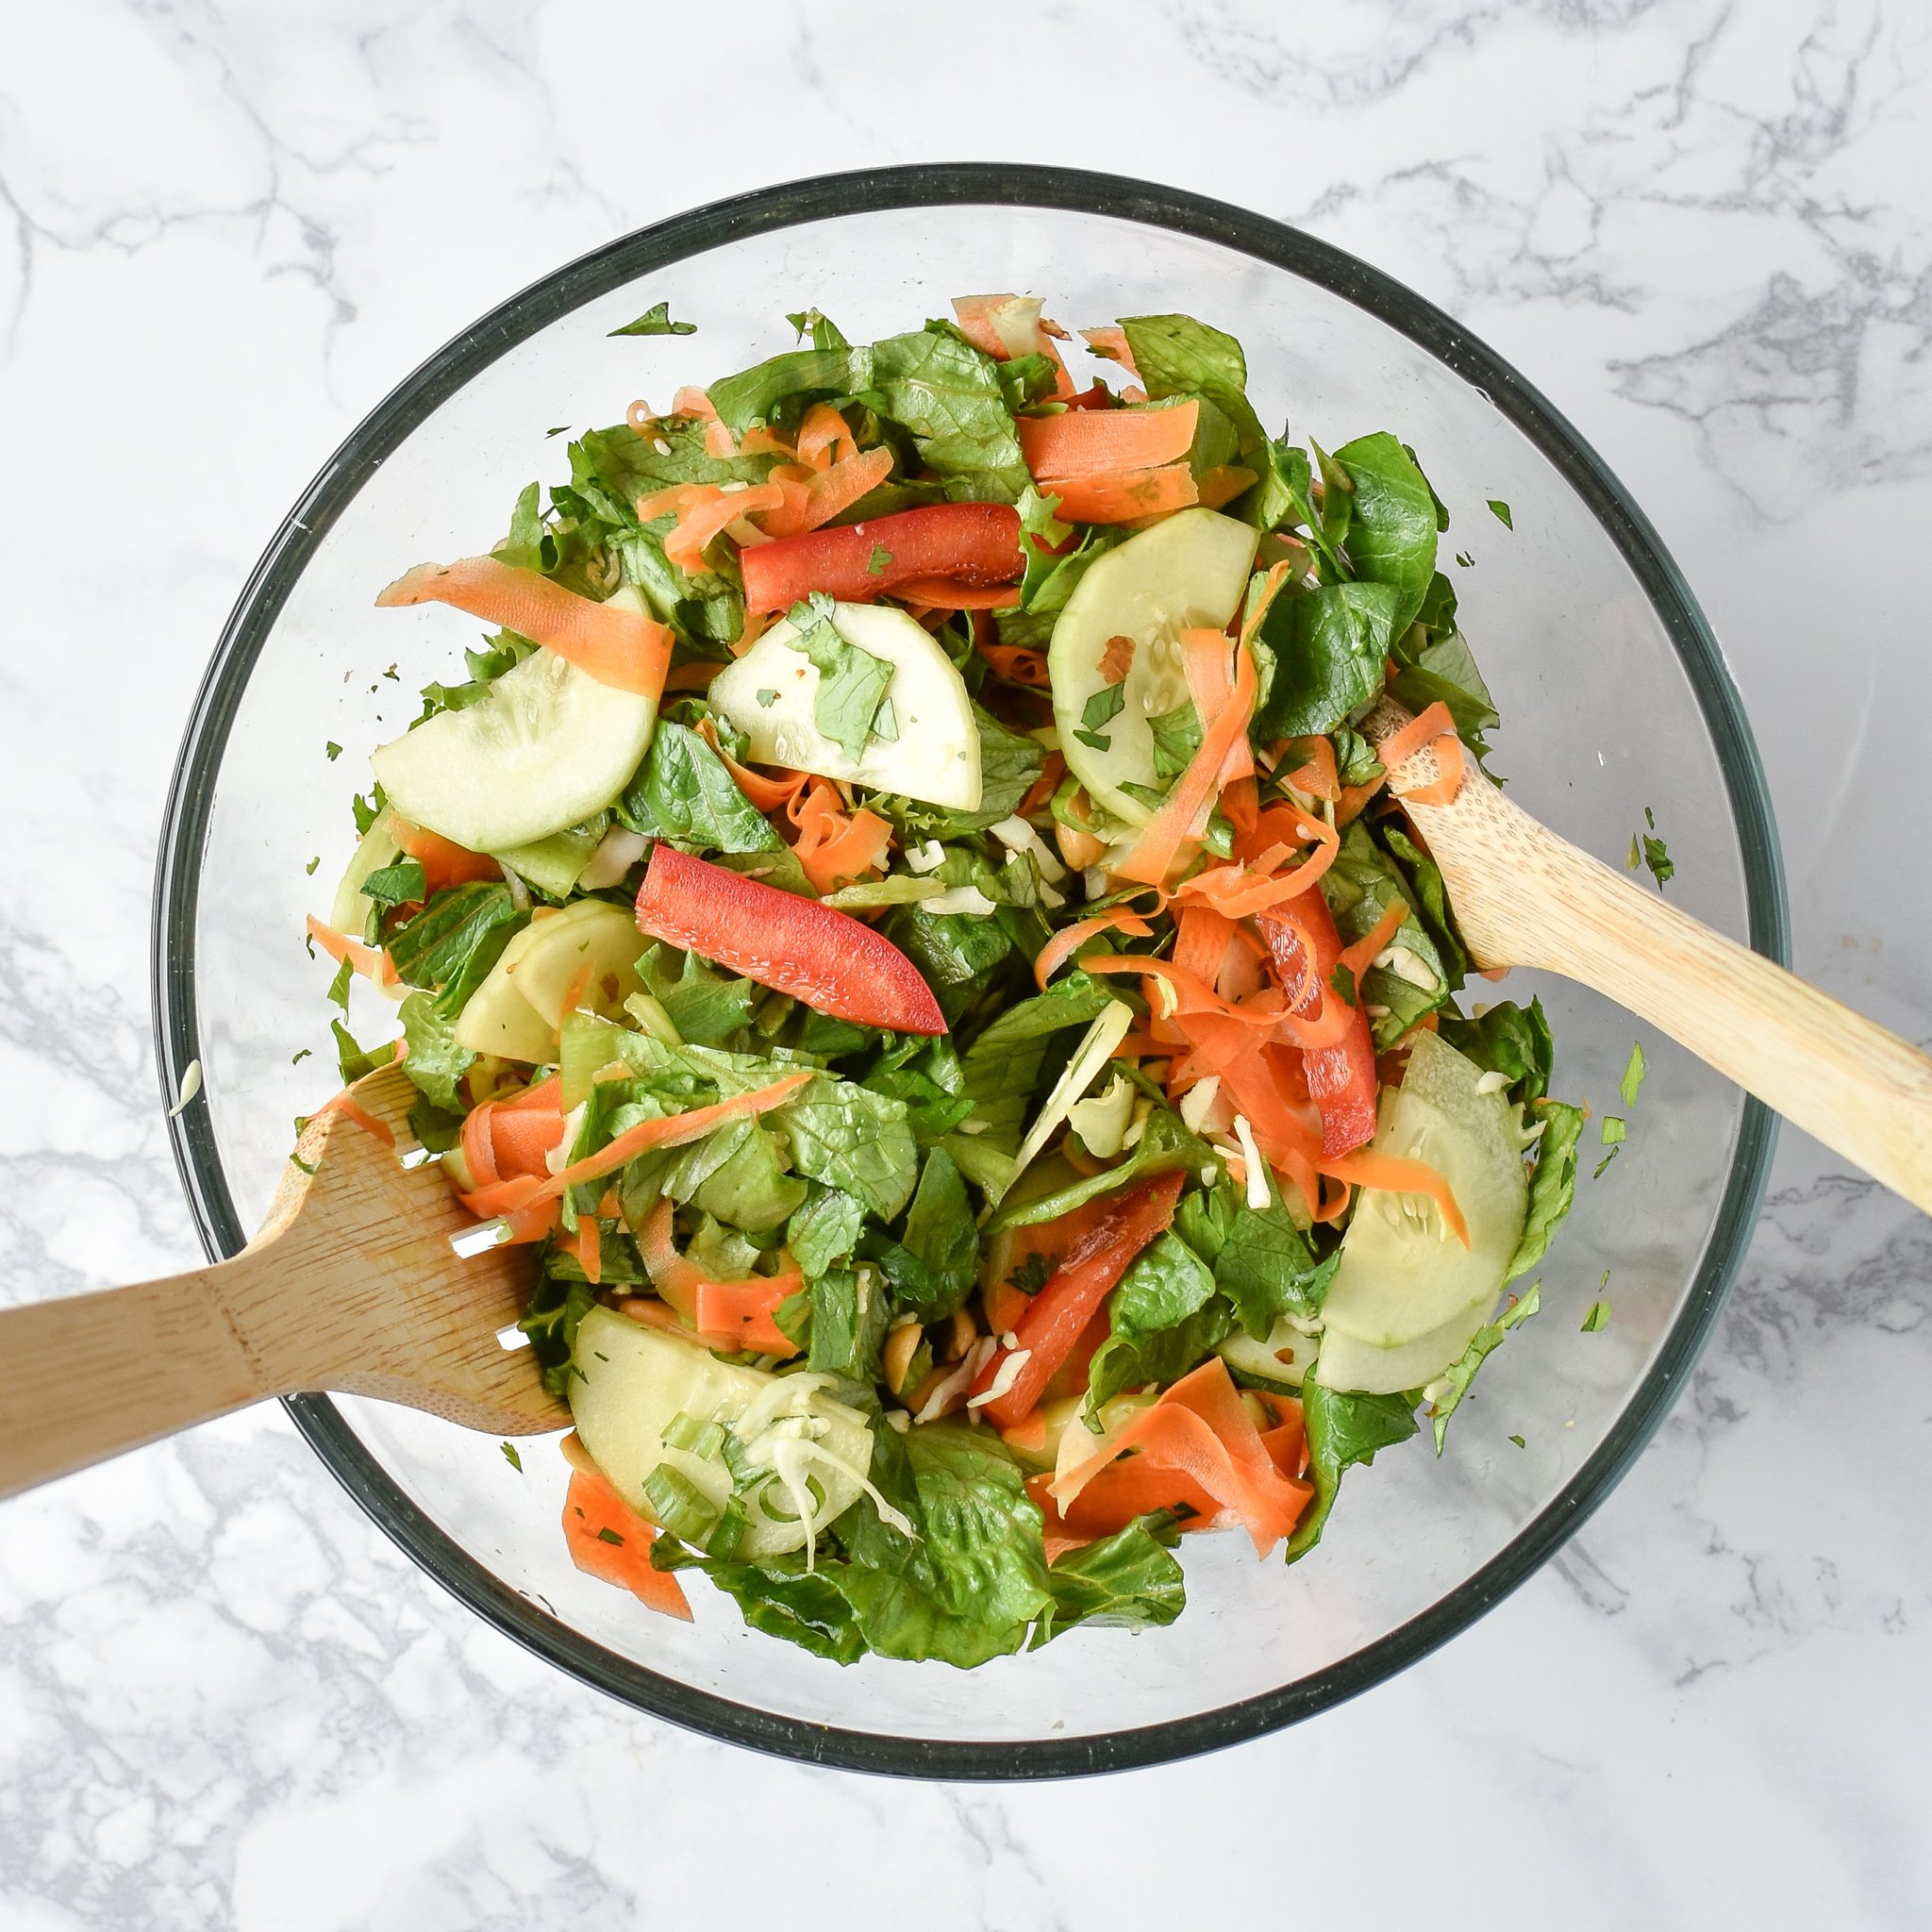 Meal Prep Chopped Thai Chicken Salad with Easy Peanut Dressing - Simple Thai-inspired chopped salad with a creamy peanut dressing recipe - Perfect for meal prep! - ProjectMealPlan.com